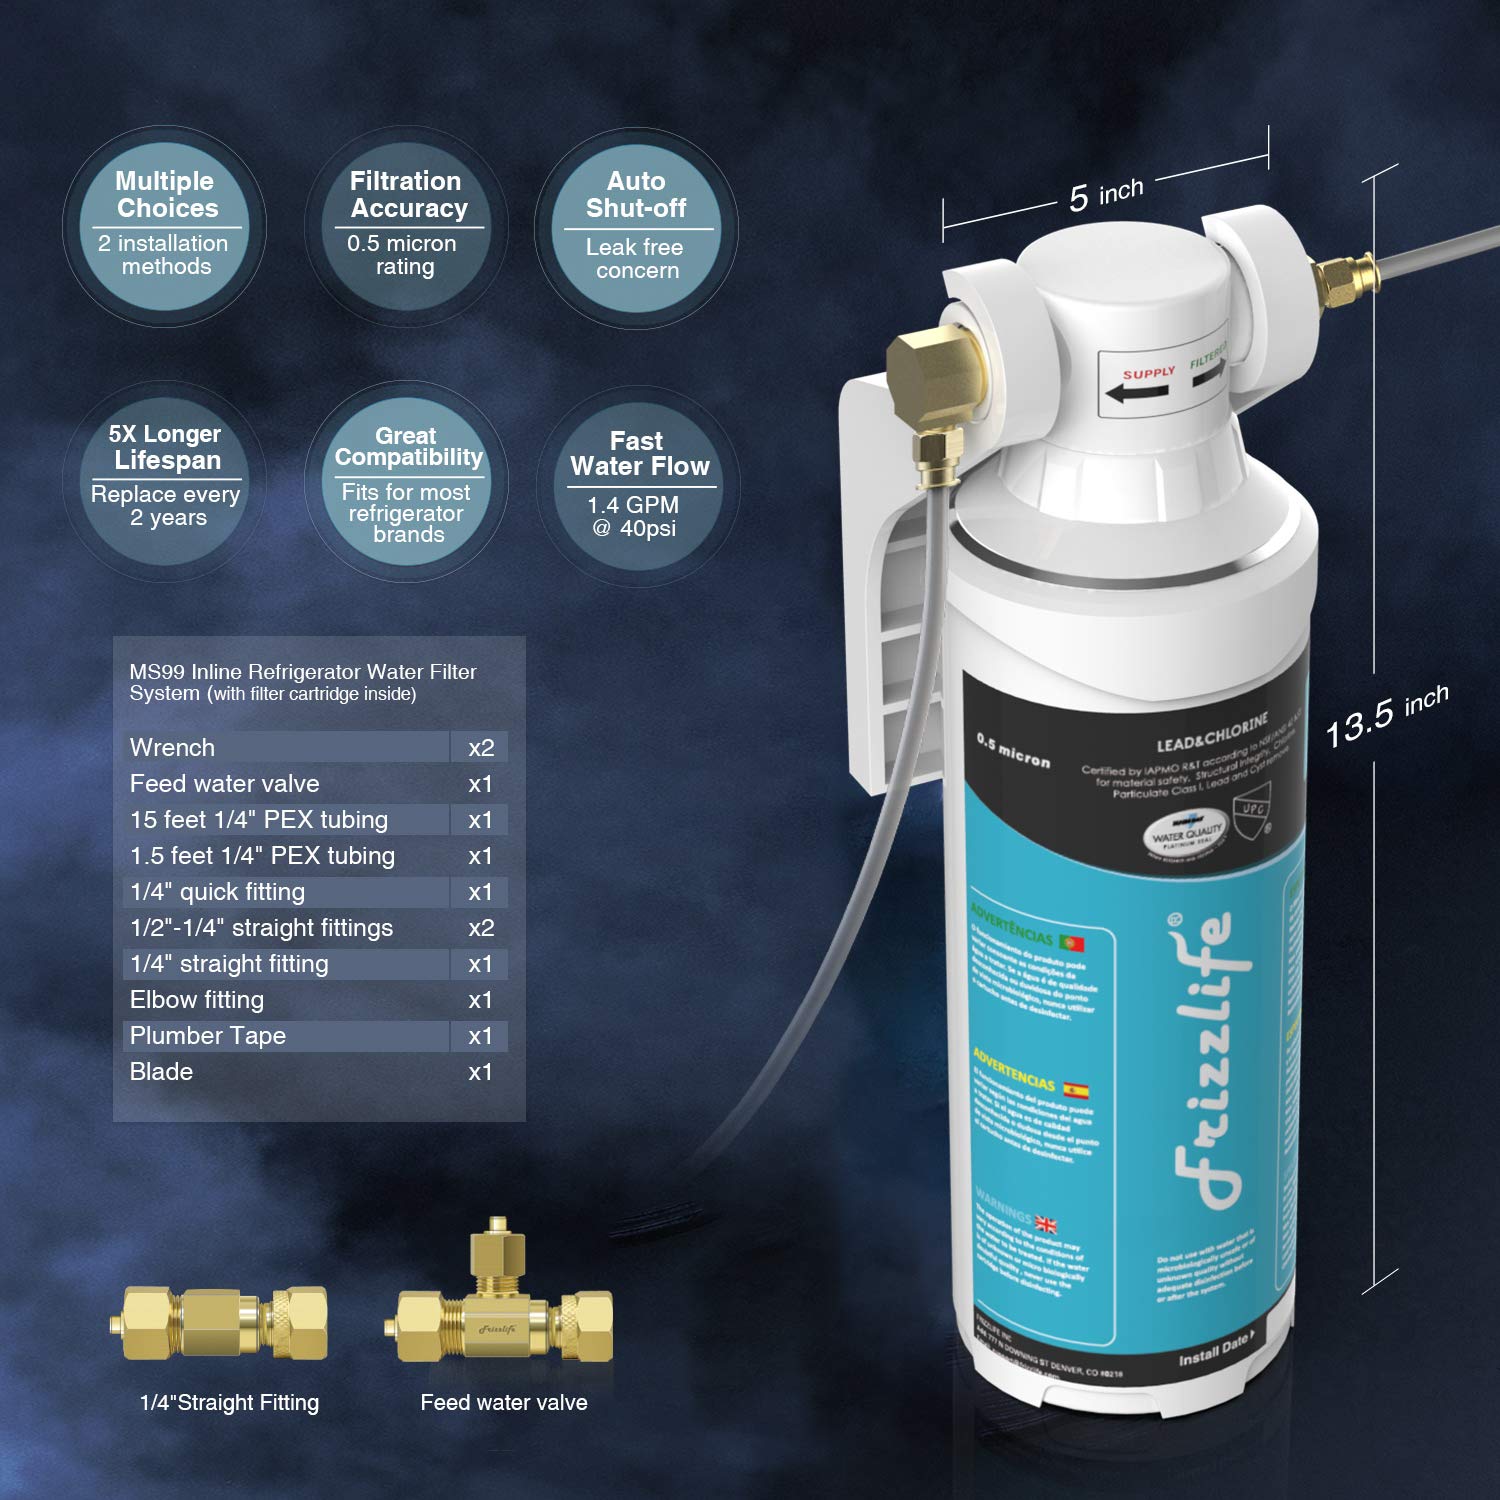 Frizzlife MS99 Inline Water Filter System for Refrigerator, Ice Maker, Under Sink - image 4 of 6